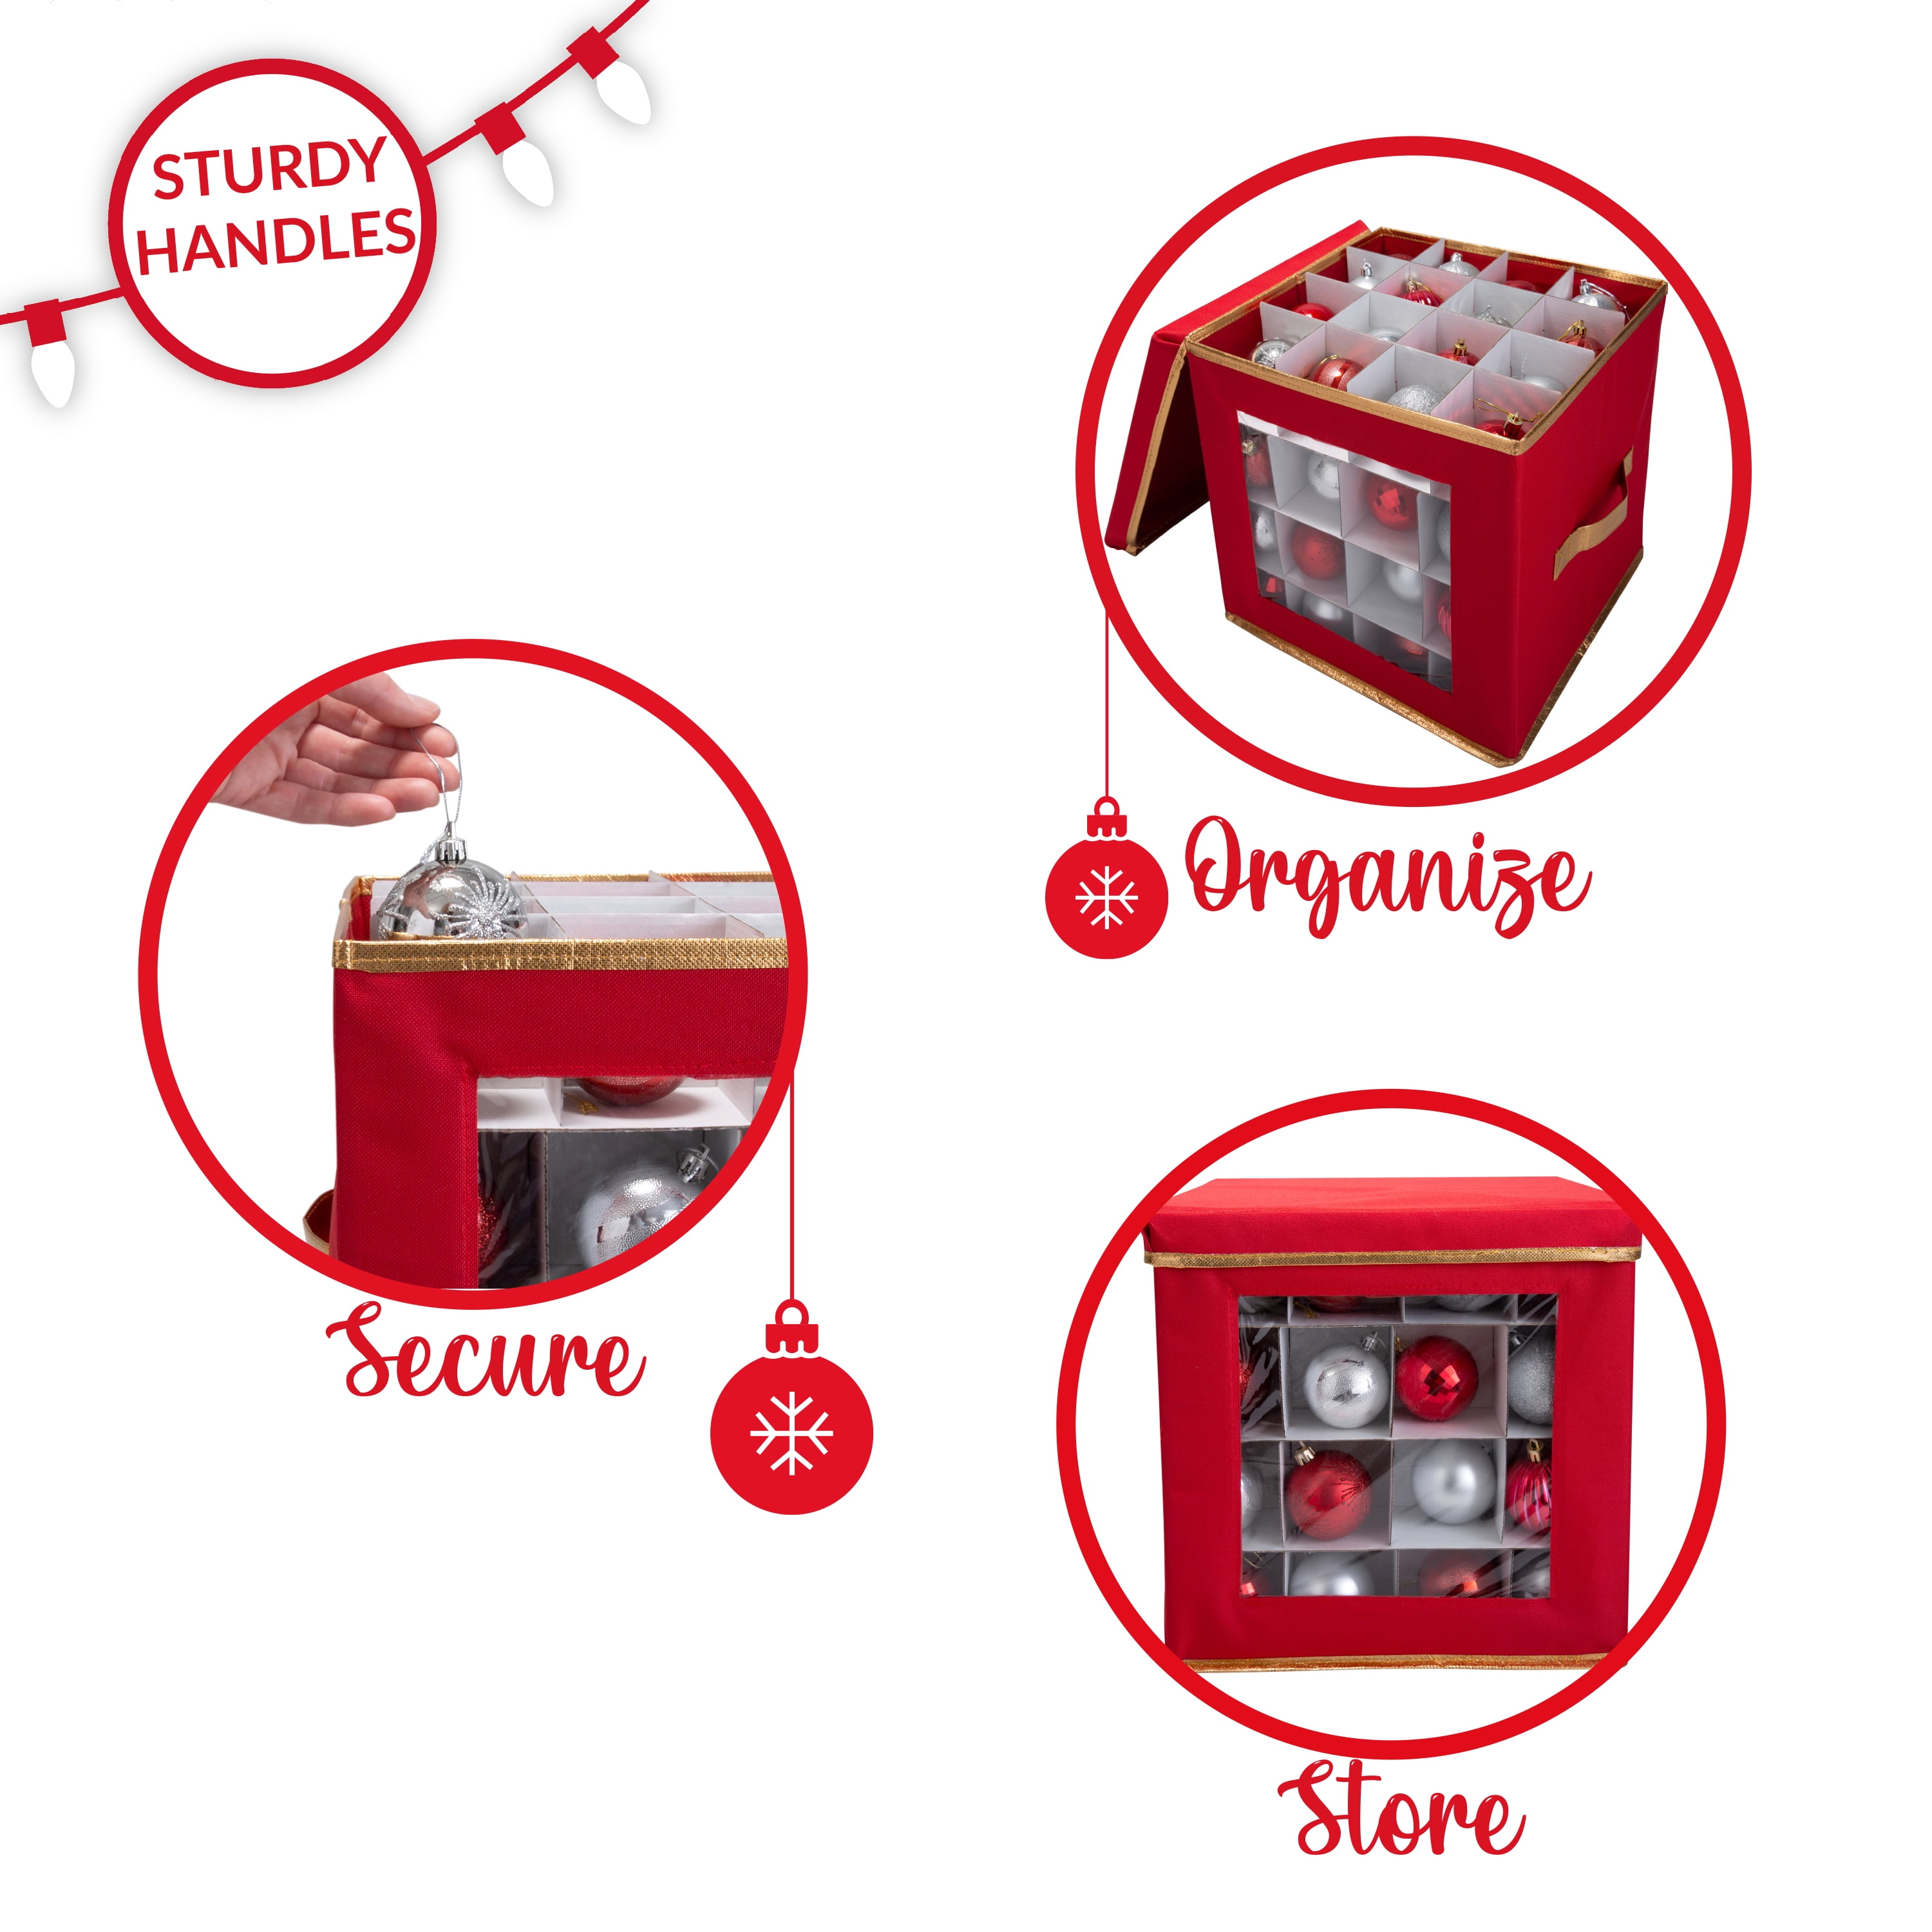 Simplify 19-in x 17.75-in 96-Compartment Red Cardboard Ornament Storage Box  in the Ornament Storage Boxes department at